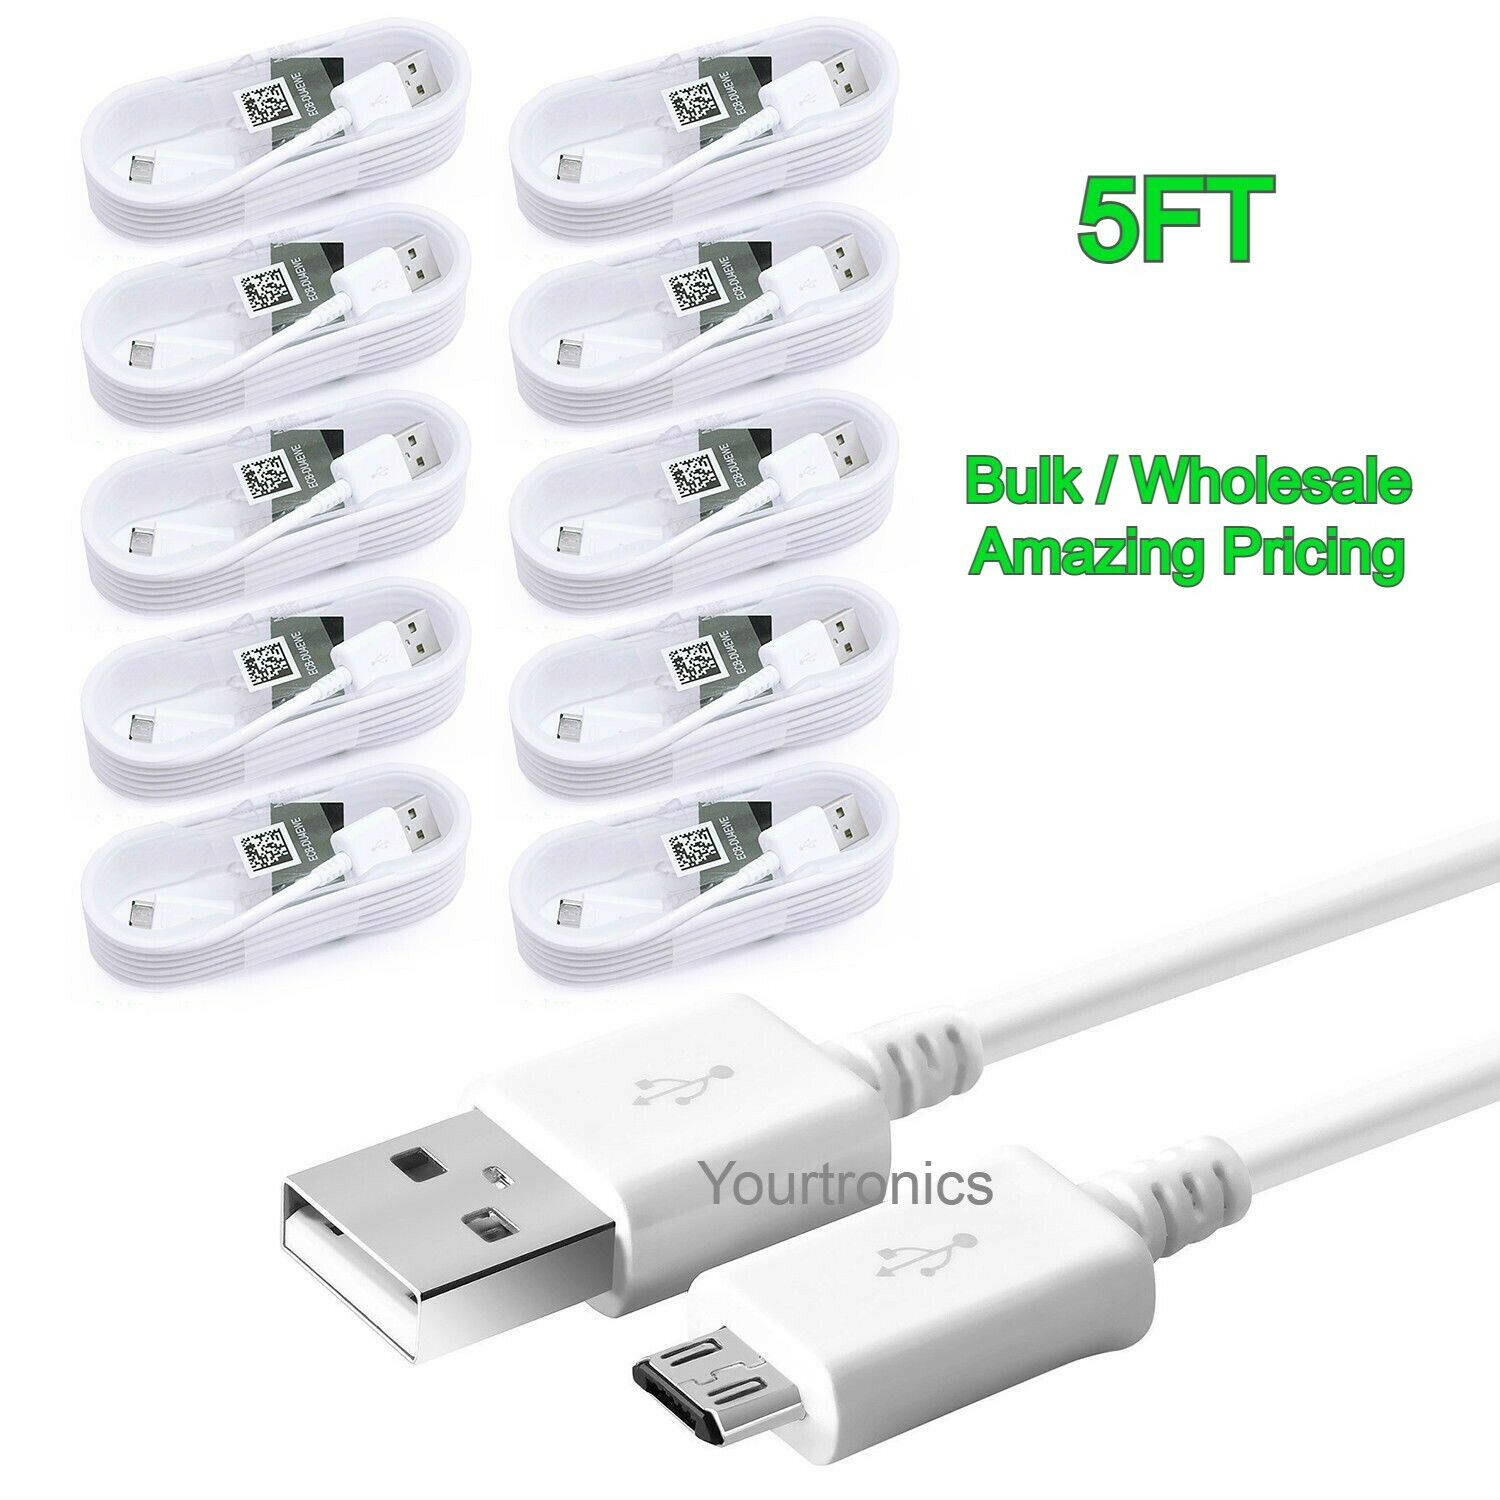 Oem Micro Usb Fast Charge Cable Rapid Sync Cord Quick Charger Bulk Wholesale 5ft